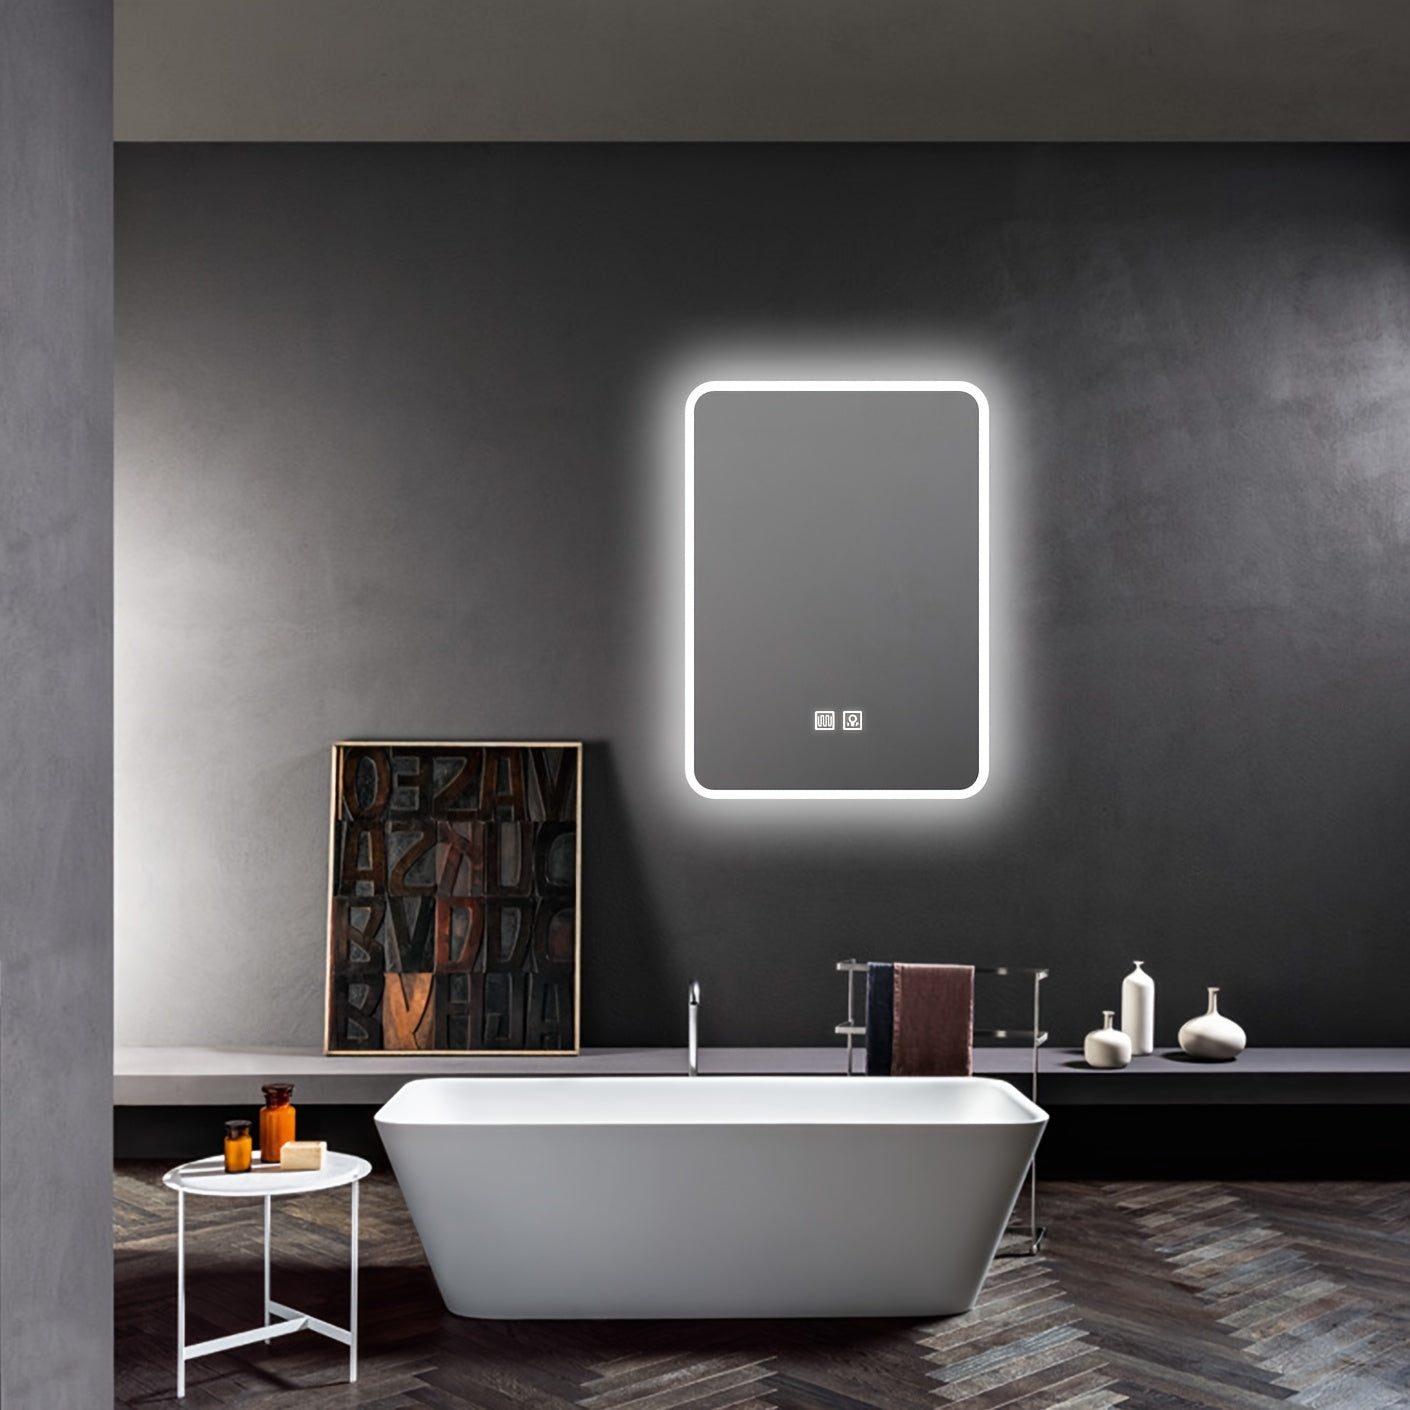 1pc Vertical Square Rounded LED Bathroom Mirror, Large-sized Wall Mounted Mirror, Adjustable Brightness, IP54 Enhanced Defogging Function, Explosion-proof Defogging In One, Dual Touch Version, Bathroom Wall Mounted Mirror, American Standard Plug